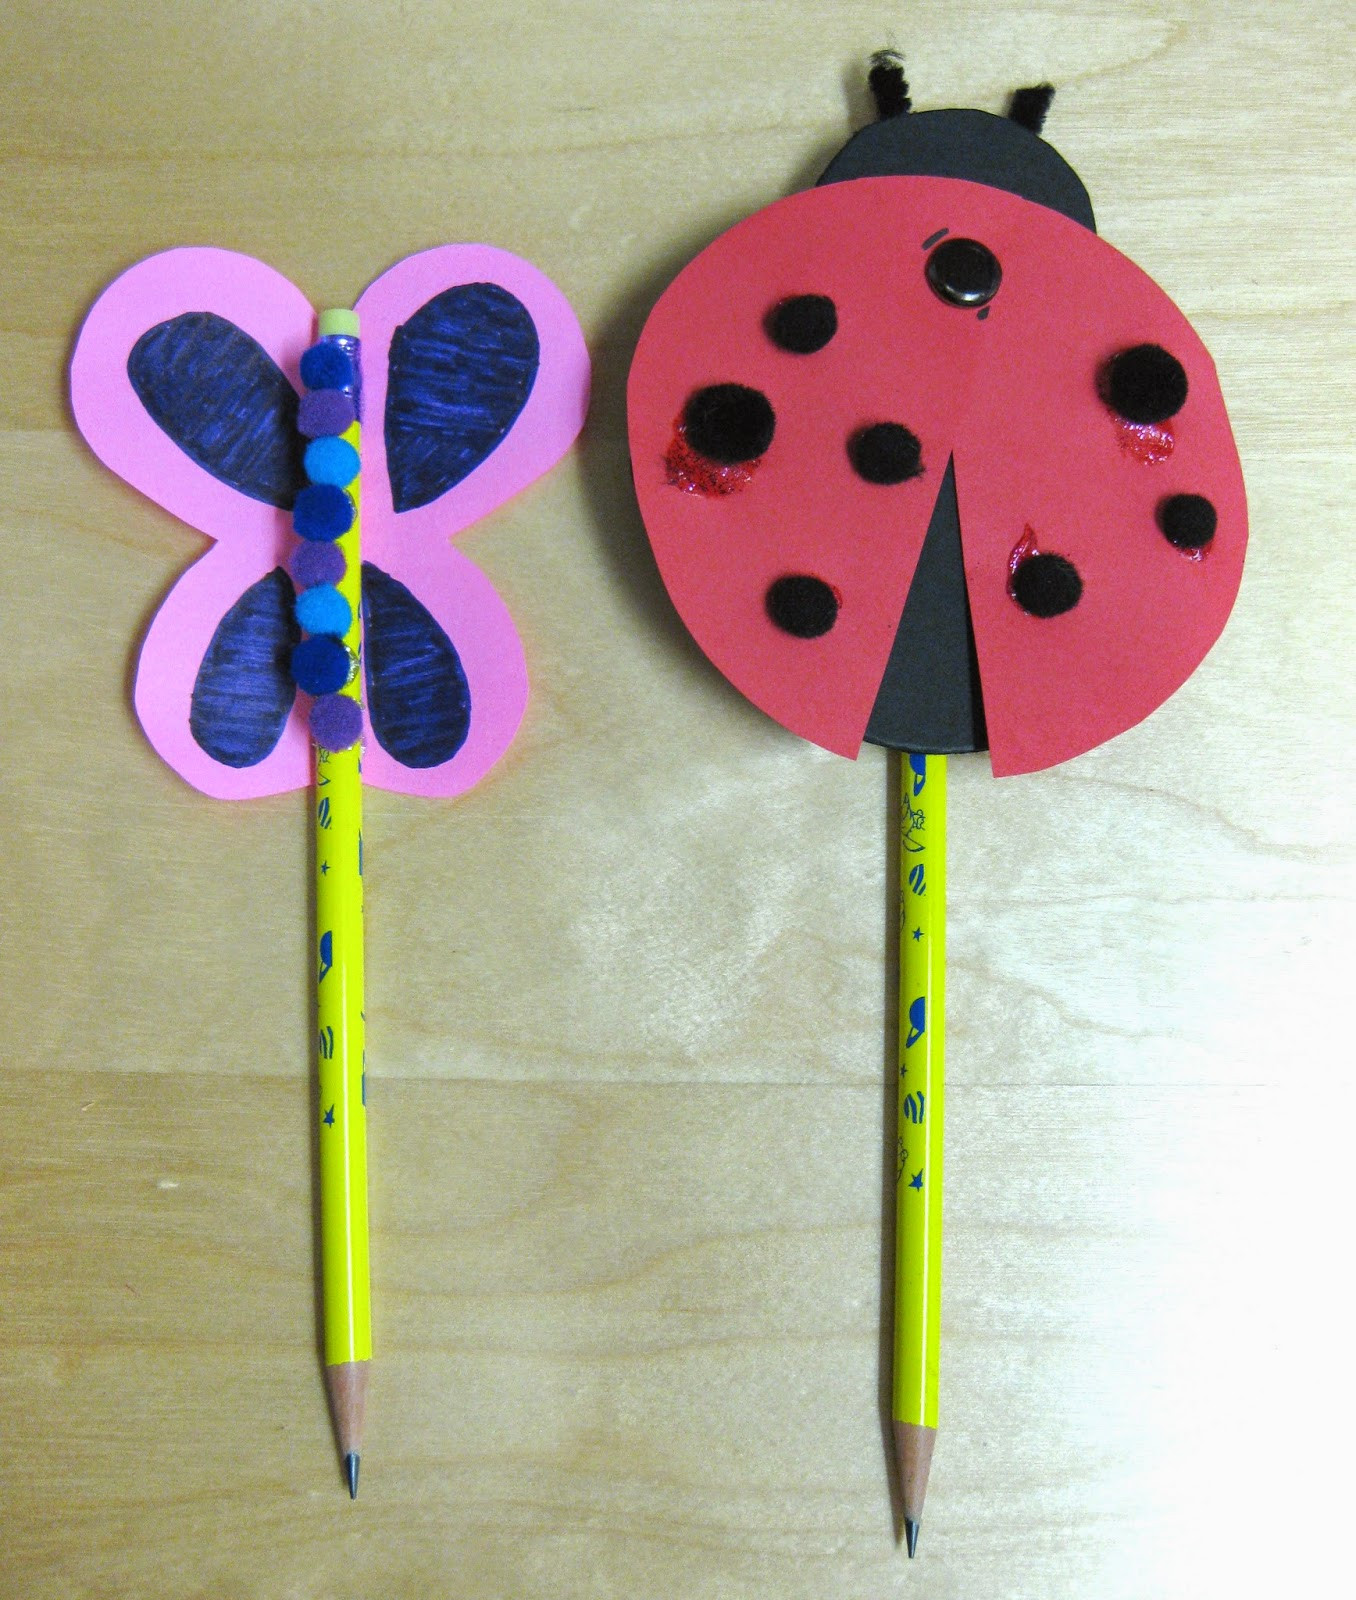 Free Craft Ideas For Kids
 pencil craft ideas for kids ideas arts and crafts projects